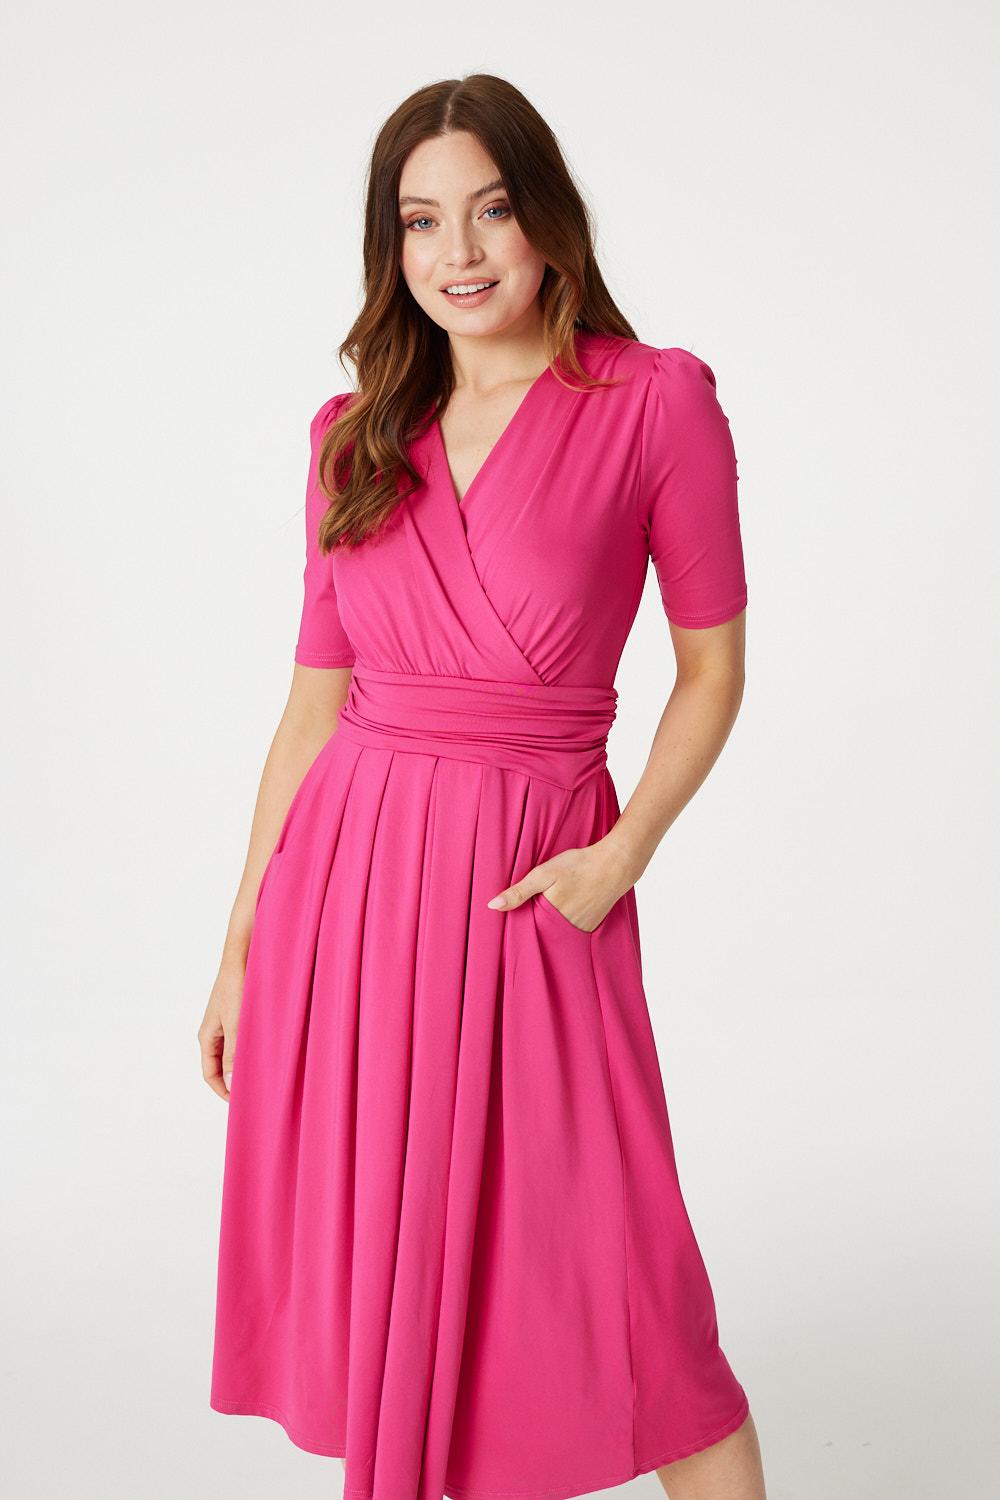 Pink | Ruched Waist Jersey Wrap Dress : Model is 5'9"/175 cm and wears UK8/EU36/US4/AUS8